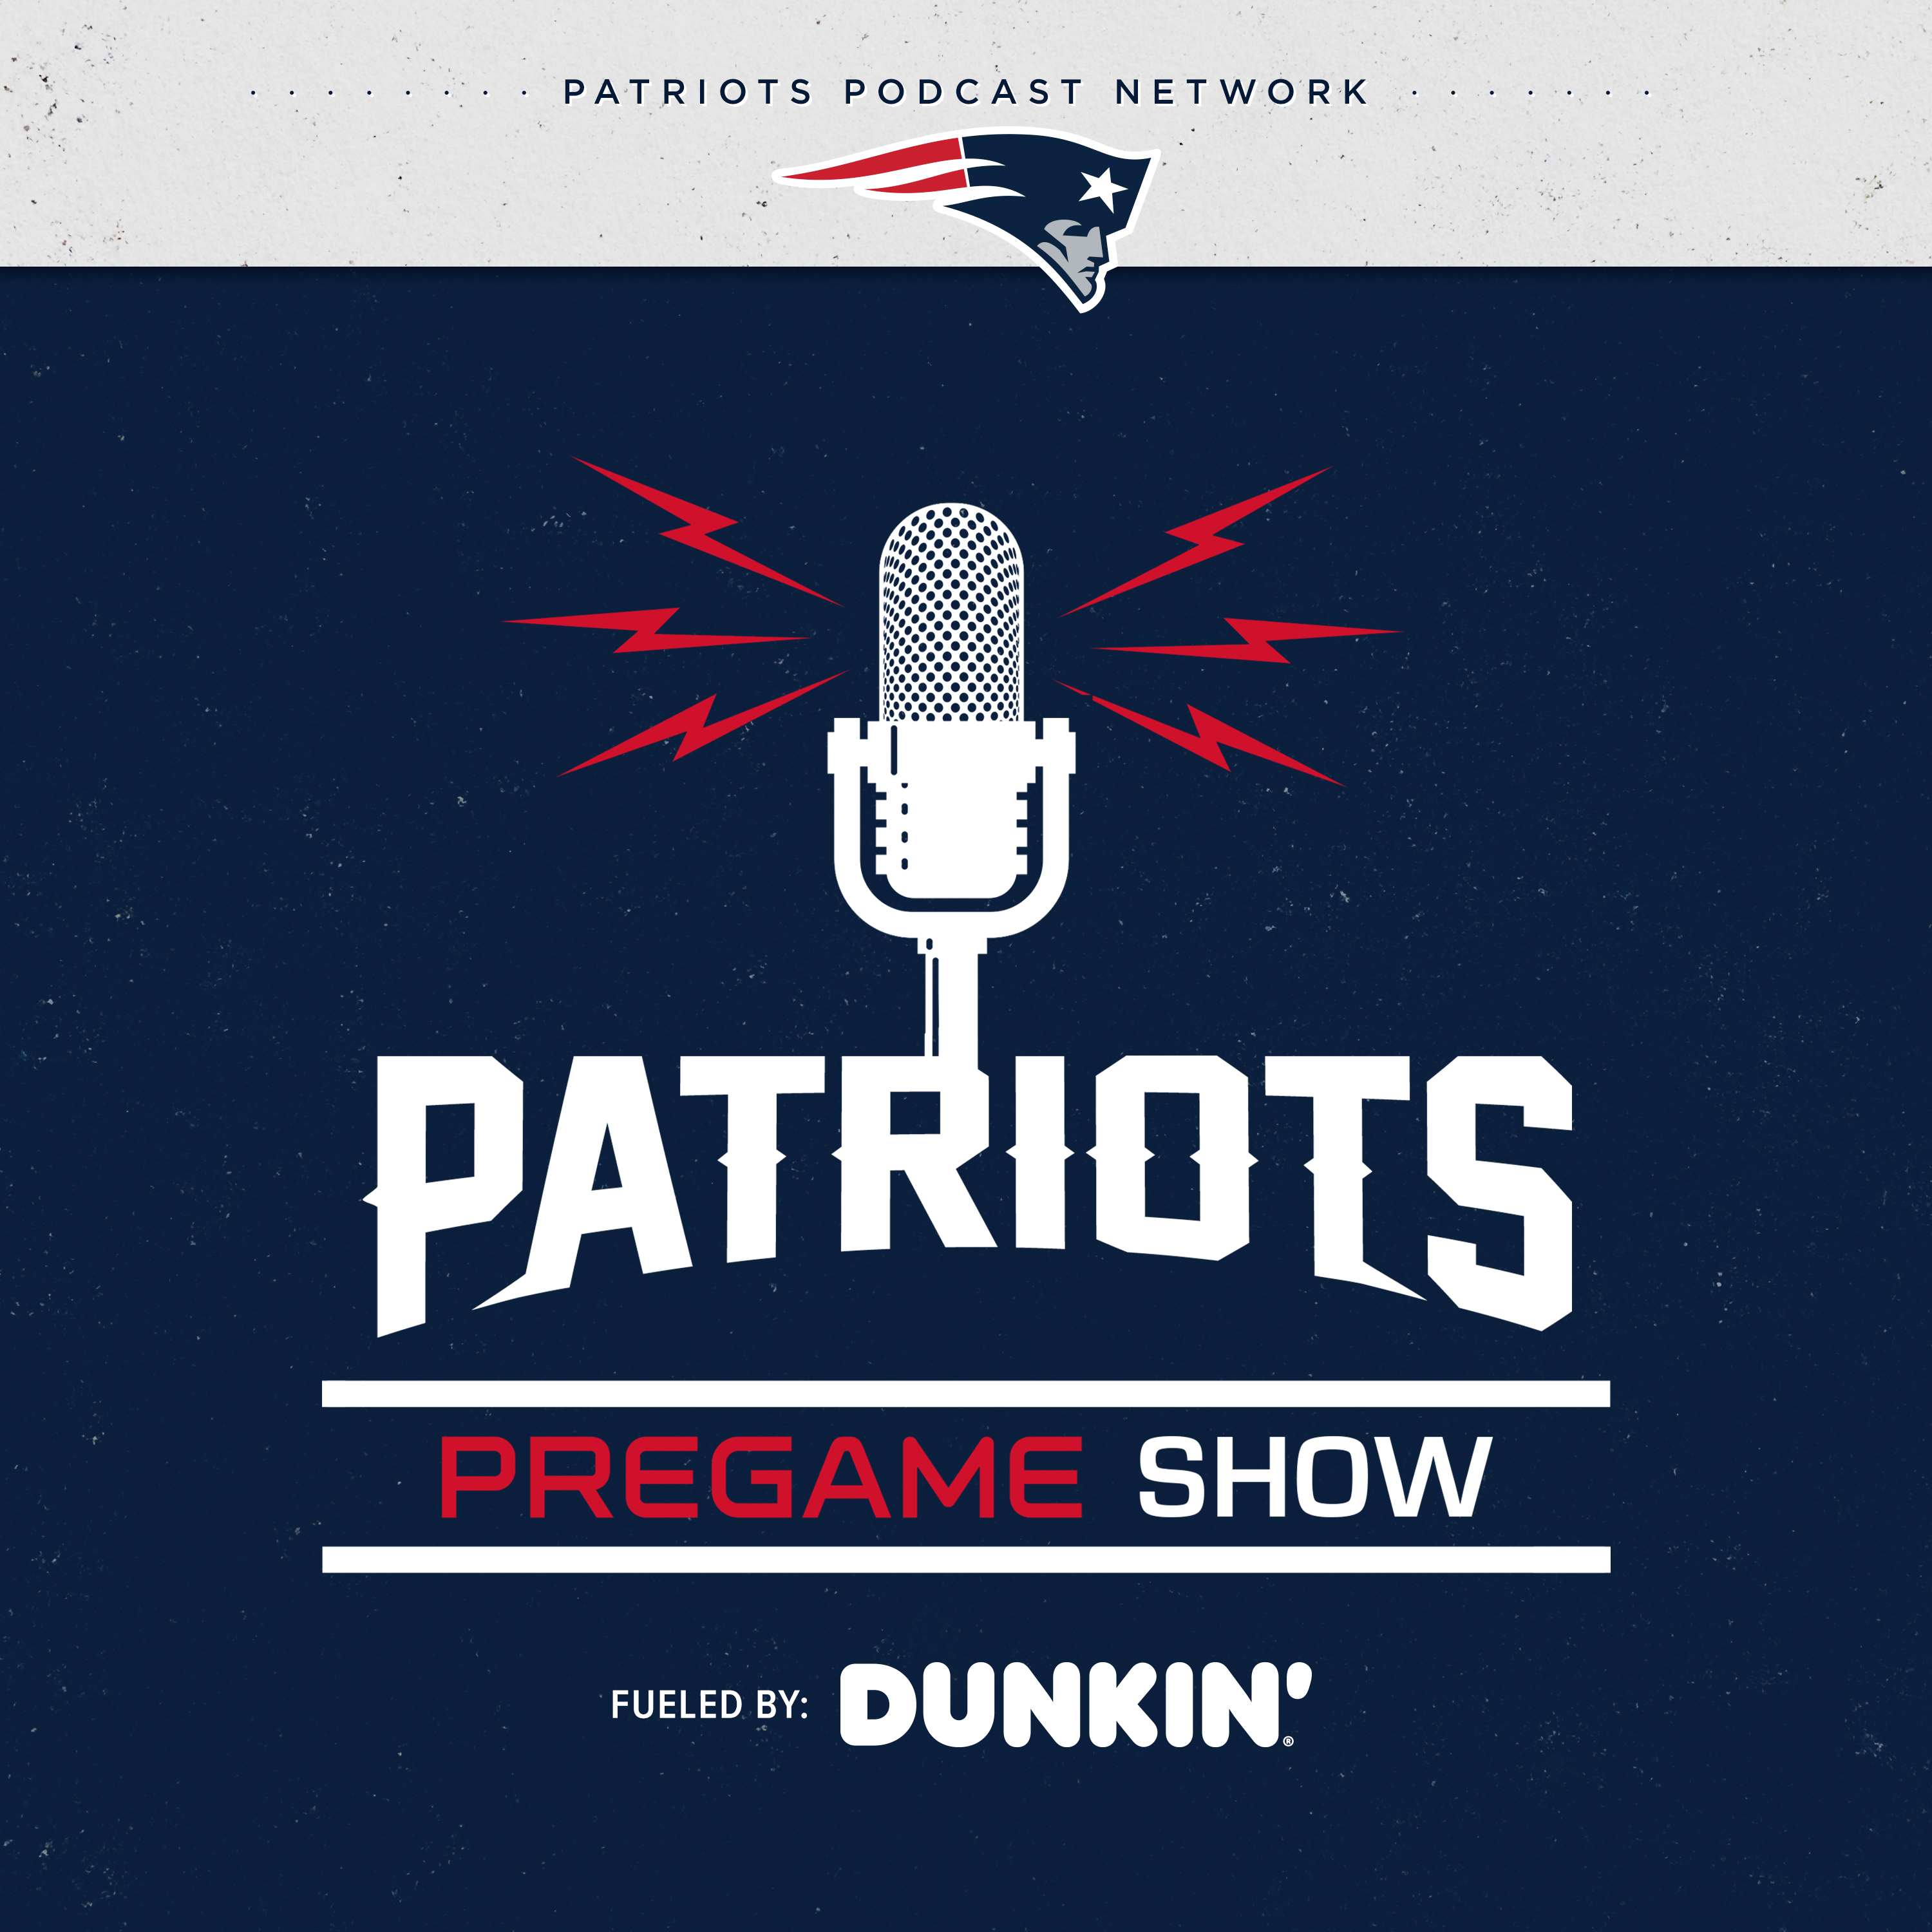 Patriots Pregame Show 10/8: Saints Preview, Inactives Analysis and Key Matchups to Watch